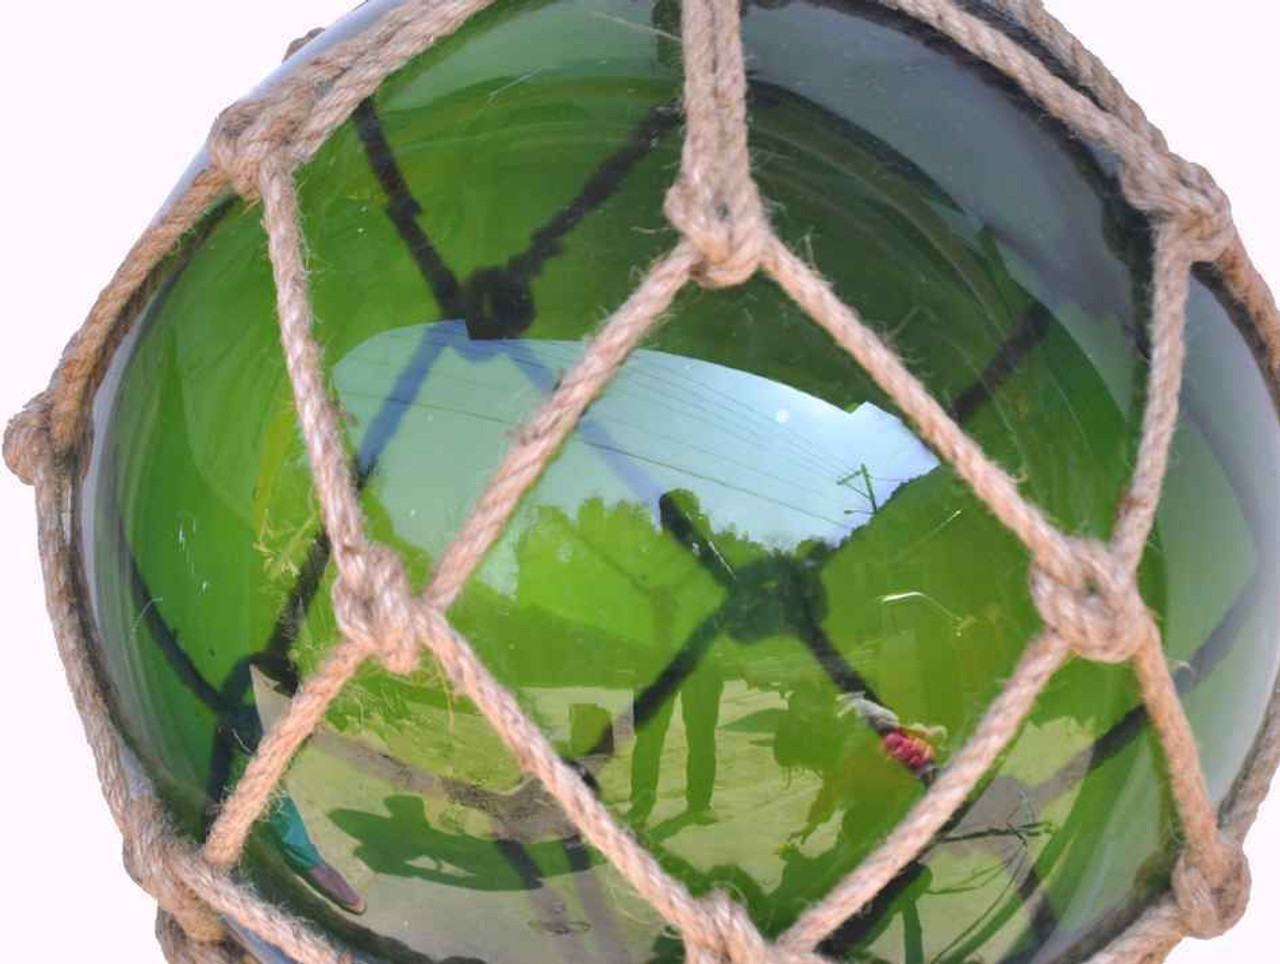 Wholesale Seafoam Green Japanese Glass Ball Fishing Float With Brown  Netting Decoration 12in - Beach Decor